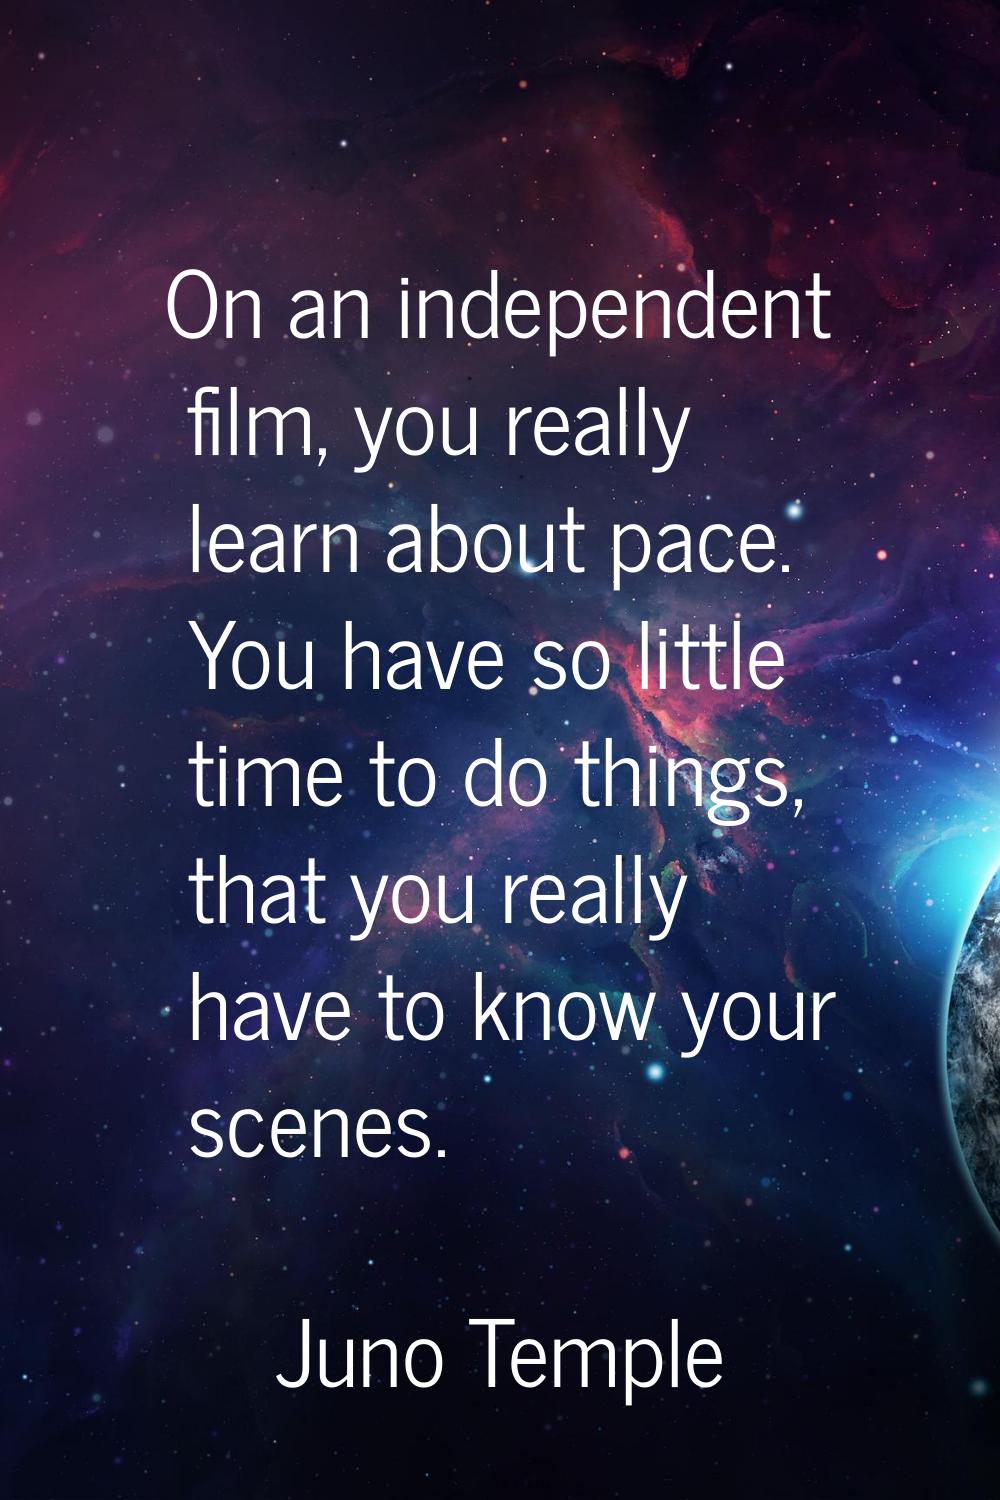 On an independent film, you really learn about pace. You have so little time to do things, that you